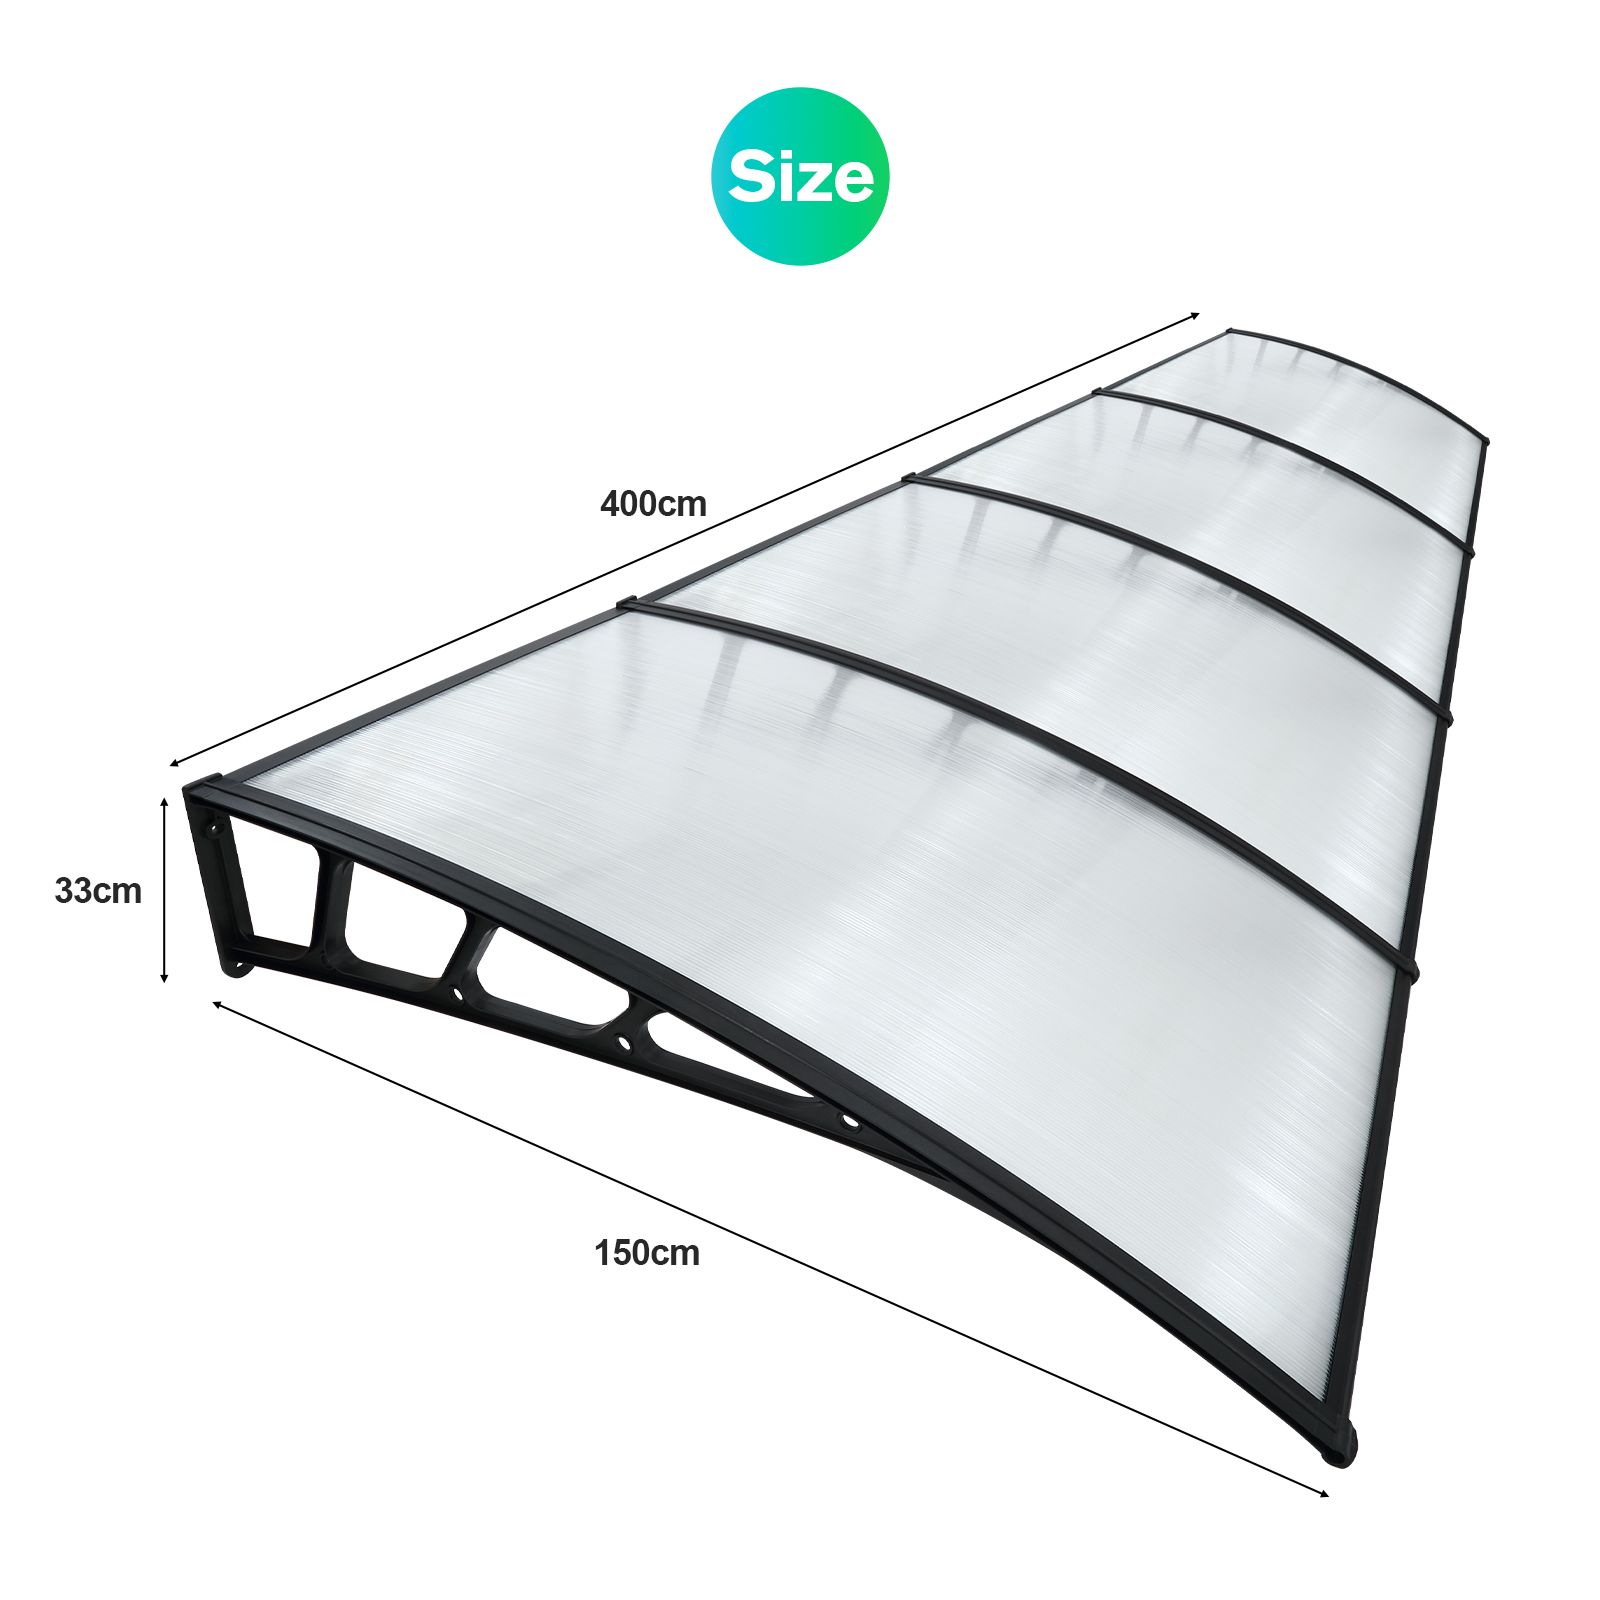 Window Door Awning 1.5x4m Outdoor Patio Canopy House Porch Deck Balcony Cover Outside Sun Shade Rain Snow UV Shield Clear Polycarbonate